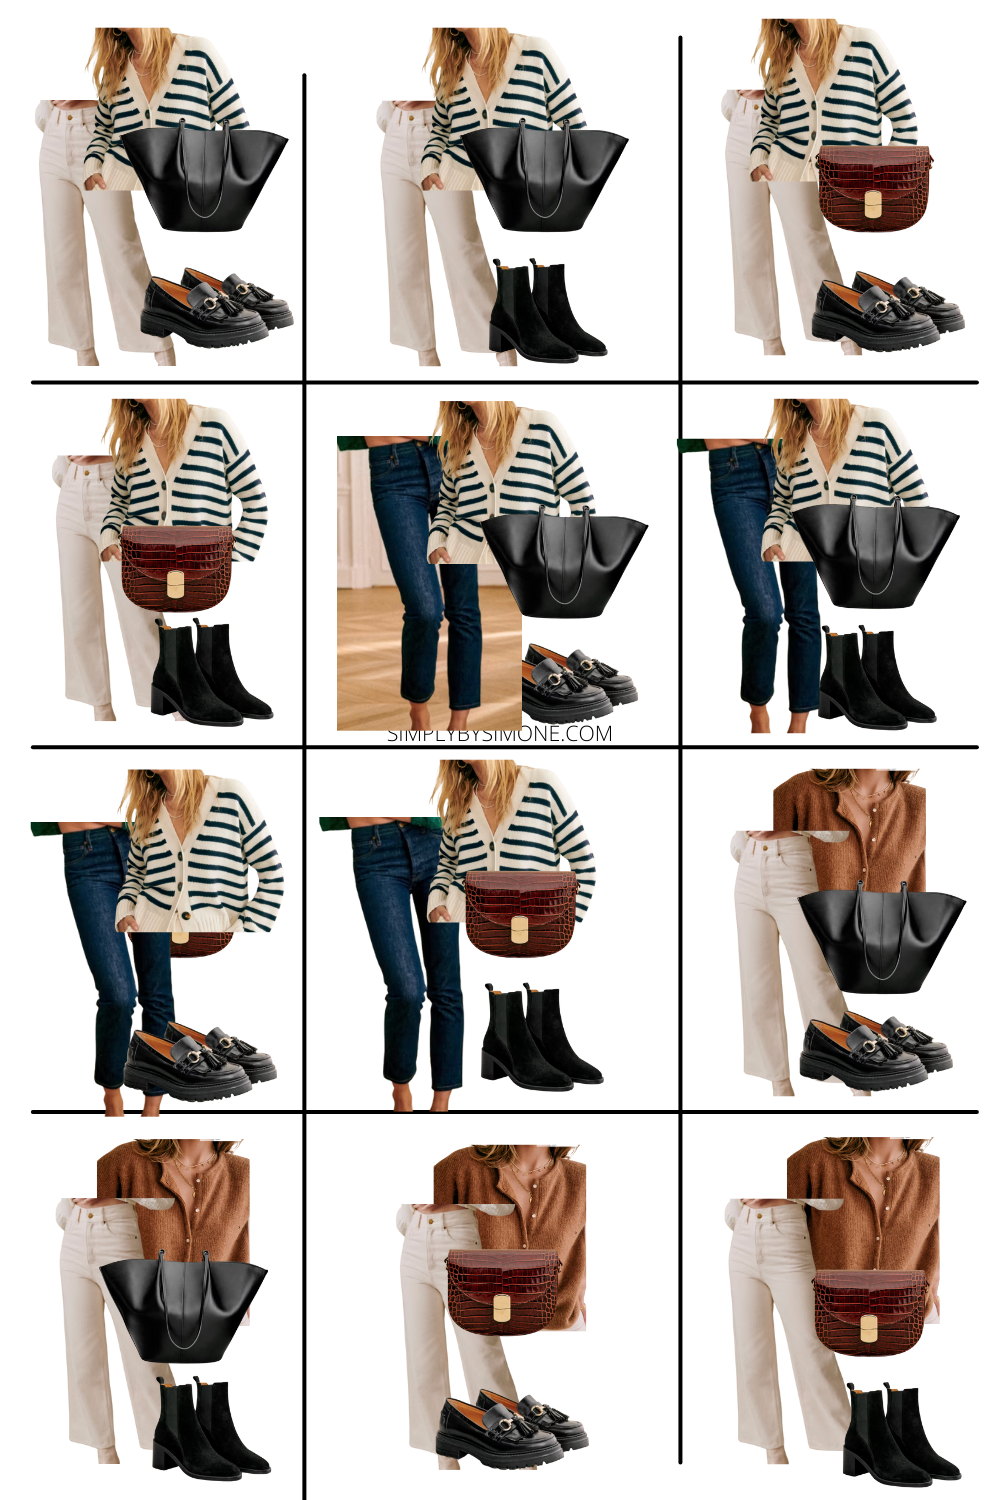 Affordable Sezane Fall Capsule Wardrobe | 12 Pieces, 48 Outfits | How to Build a Capsule Wardrobe | Sezane Fall Clothes | Outfit Inspiration | 48 Fall Weather Outfit Ideas | Fall Vacation Packing Guide | Sezane Fall Capsule Wardrobe - What To Wear This Fall 2023, Parisian Outfit Ideas | Looks 25-36 | Simply by Simone